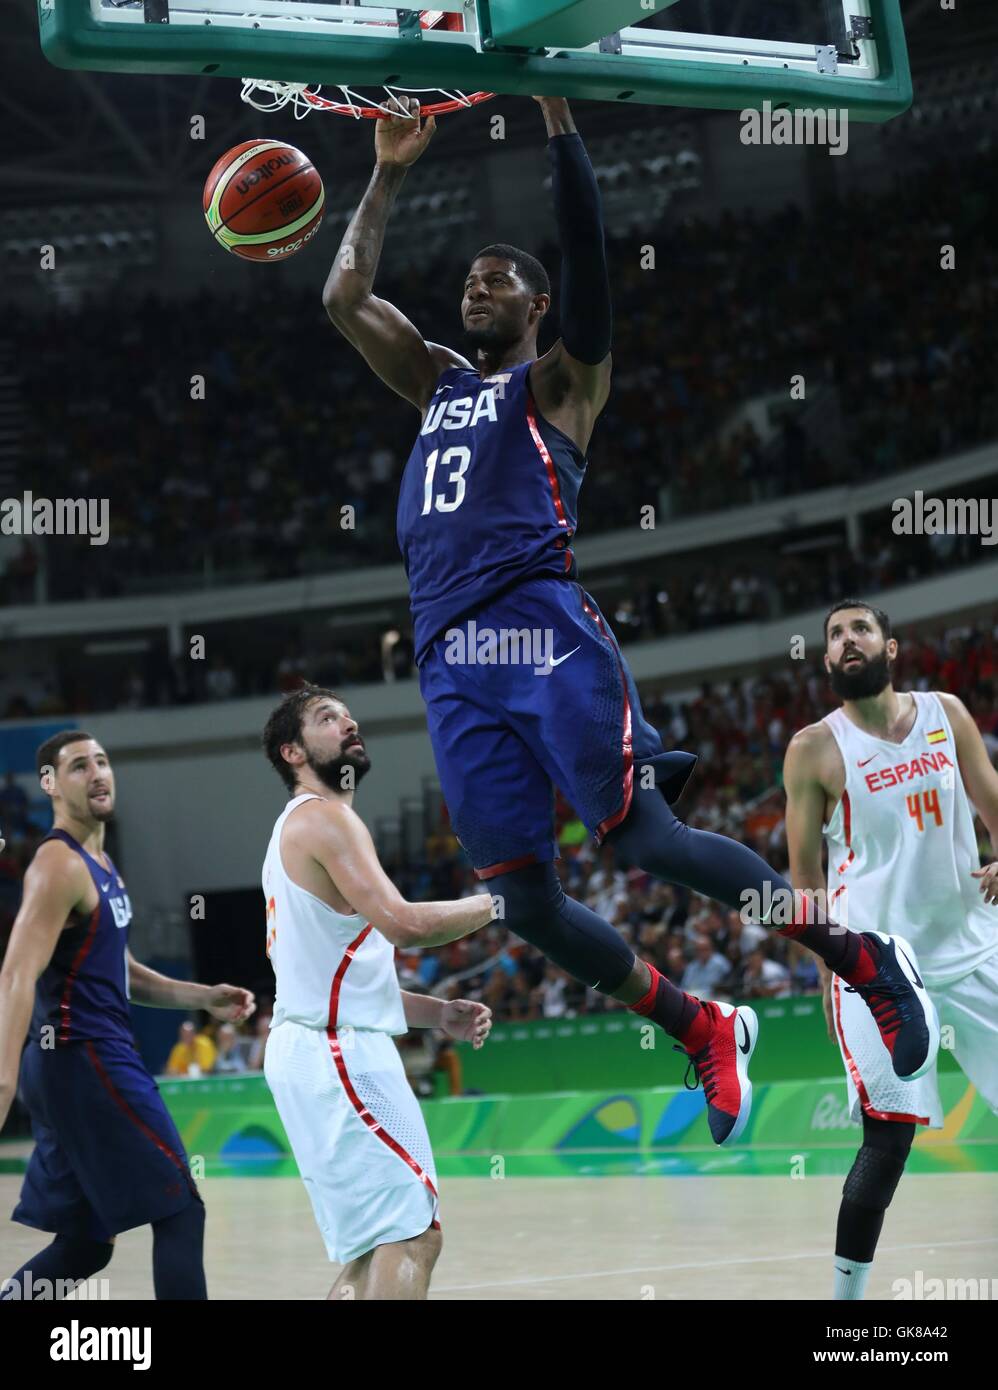 Rio De Janeiro, Brazil. 19th Aug, 2016. Paul George (top) of the United States competes during the men's basketball semifinal between the United States and Spain at the 2016 Rio Olympic Games in Rio de Janeiro, Brazil, on Aug. 19, 2016. The United States beat Spain with 82:76. Credit:  Meng Yongmin/Xinhua/Alamy Live News Stock Photo